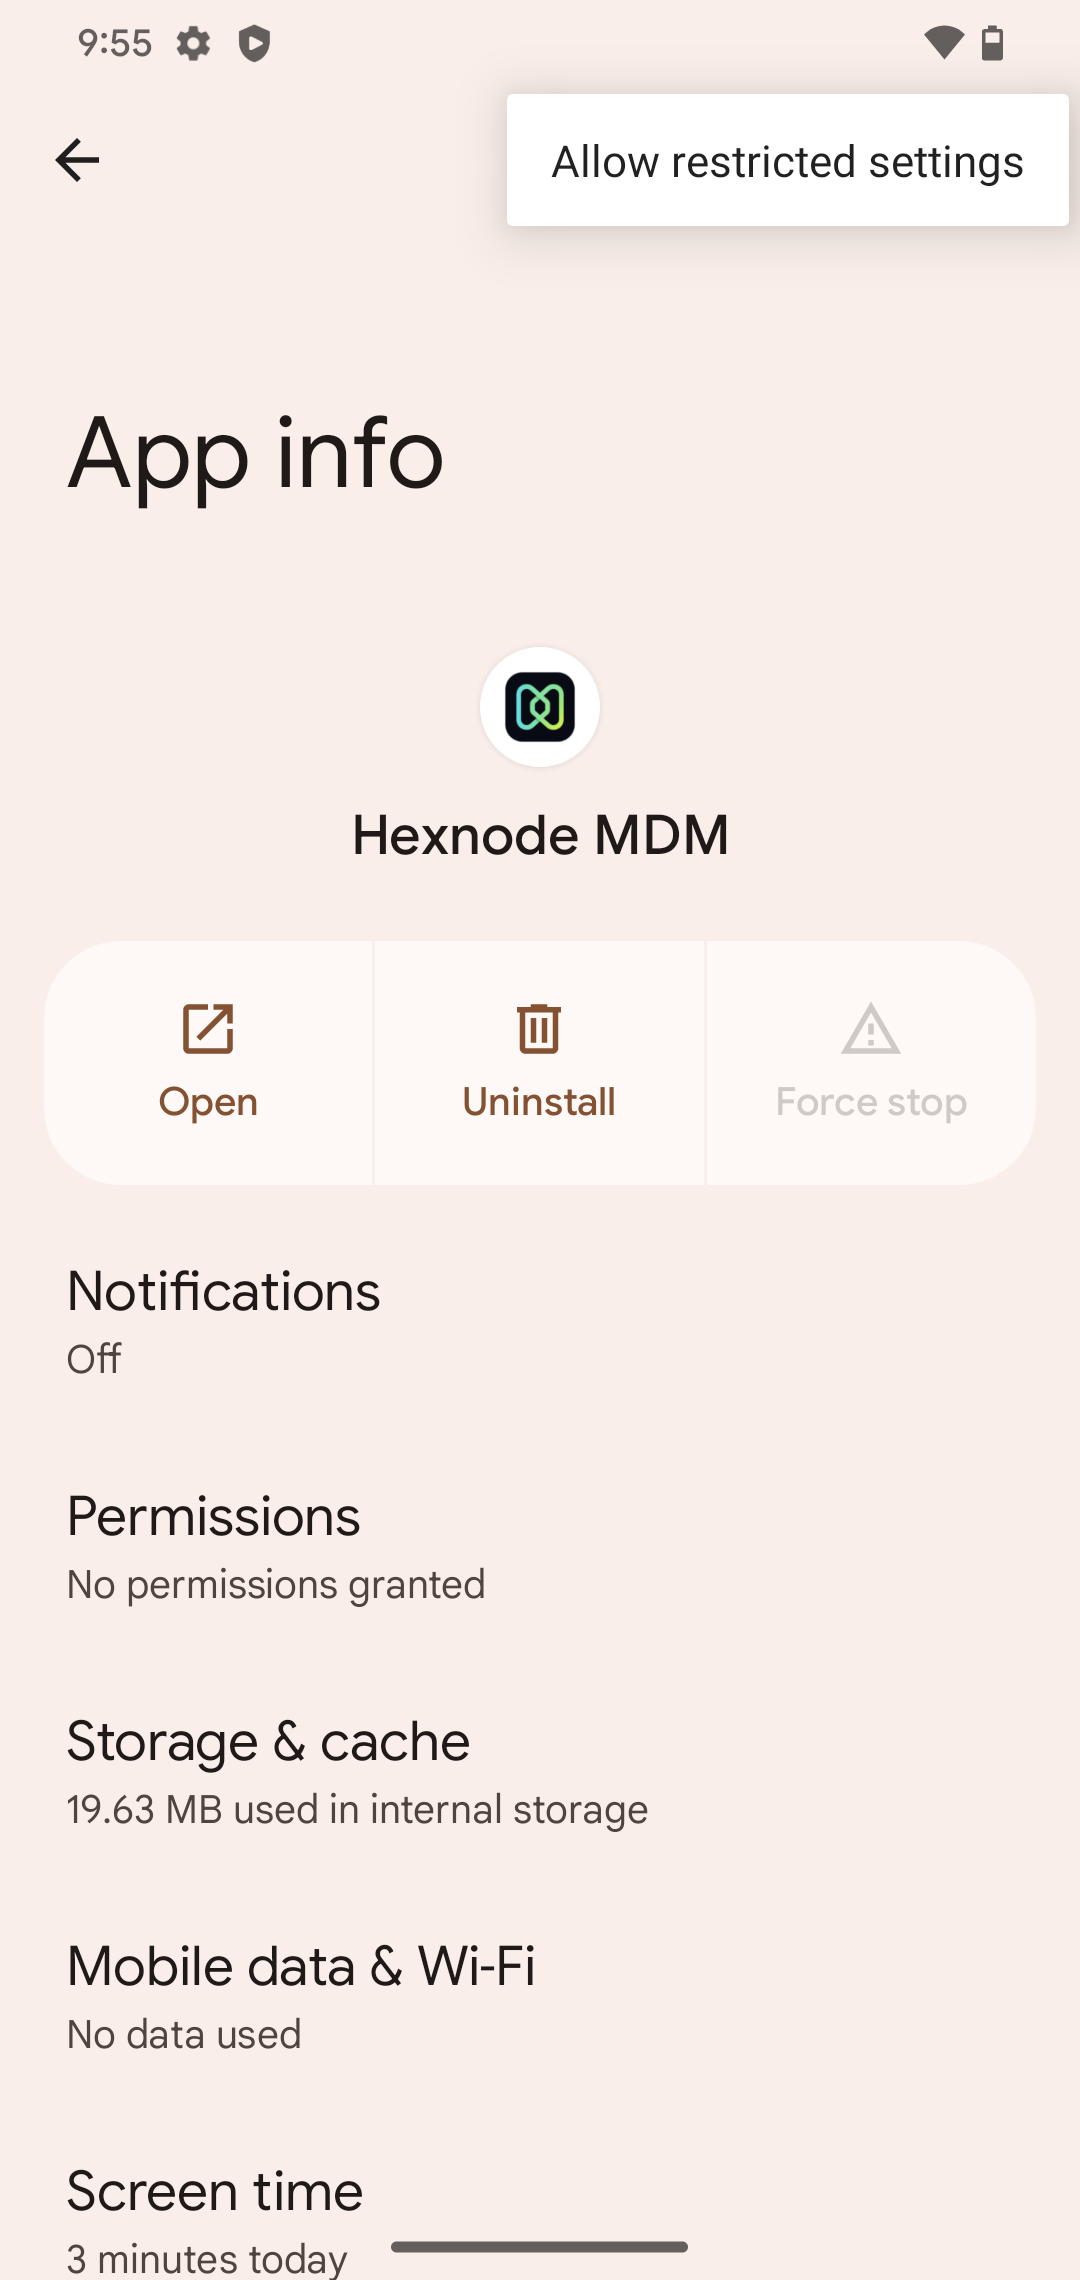 Select the Allow restricted settings option from the Hexnode App info page.